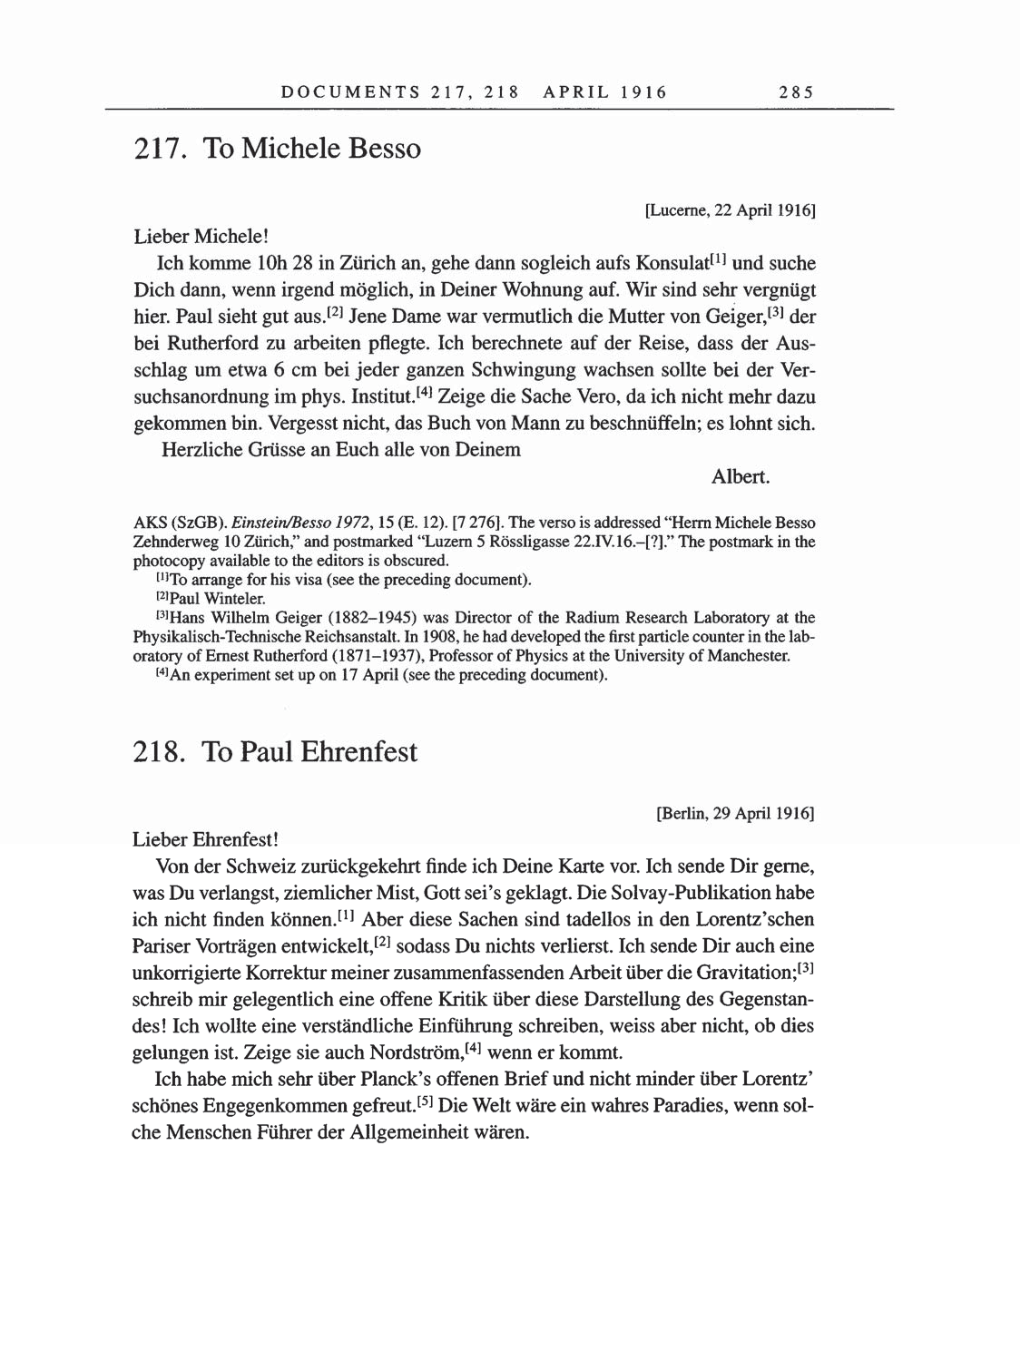 Volume 8, Part A: The Berlin Years: Correspondence 1914-1917 page 285